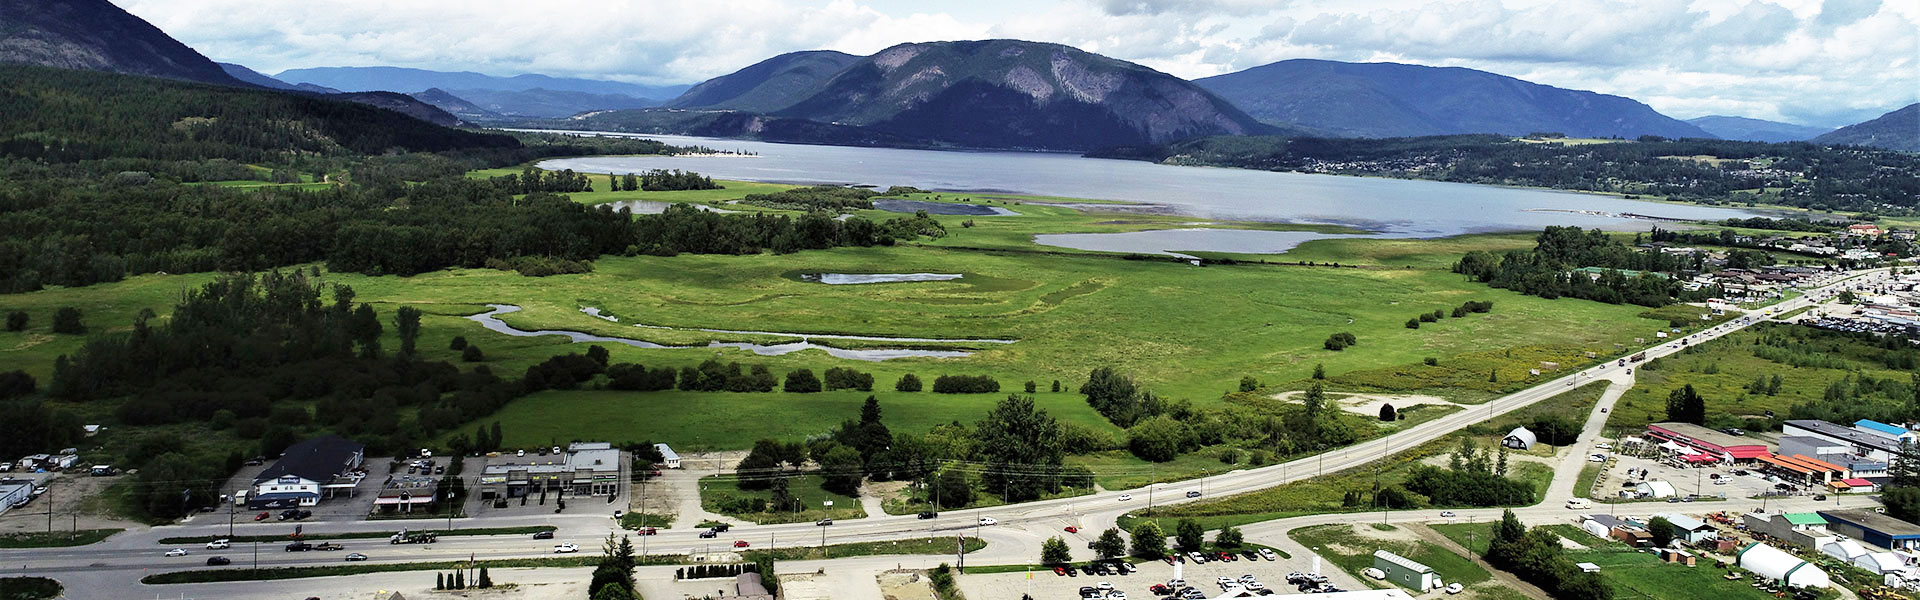 Blackburn Surveying provides dependable surveying services in Salmon Arm and across Western Canada.